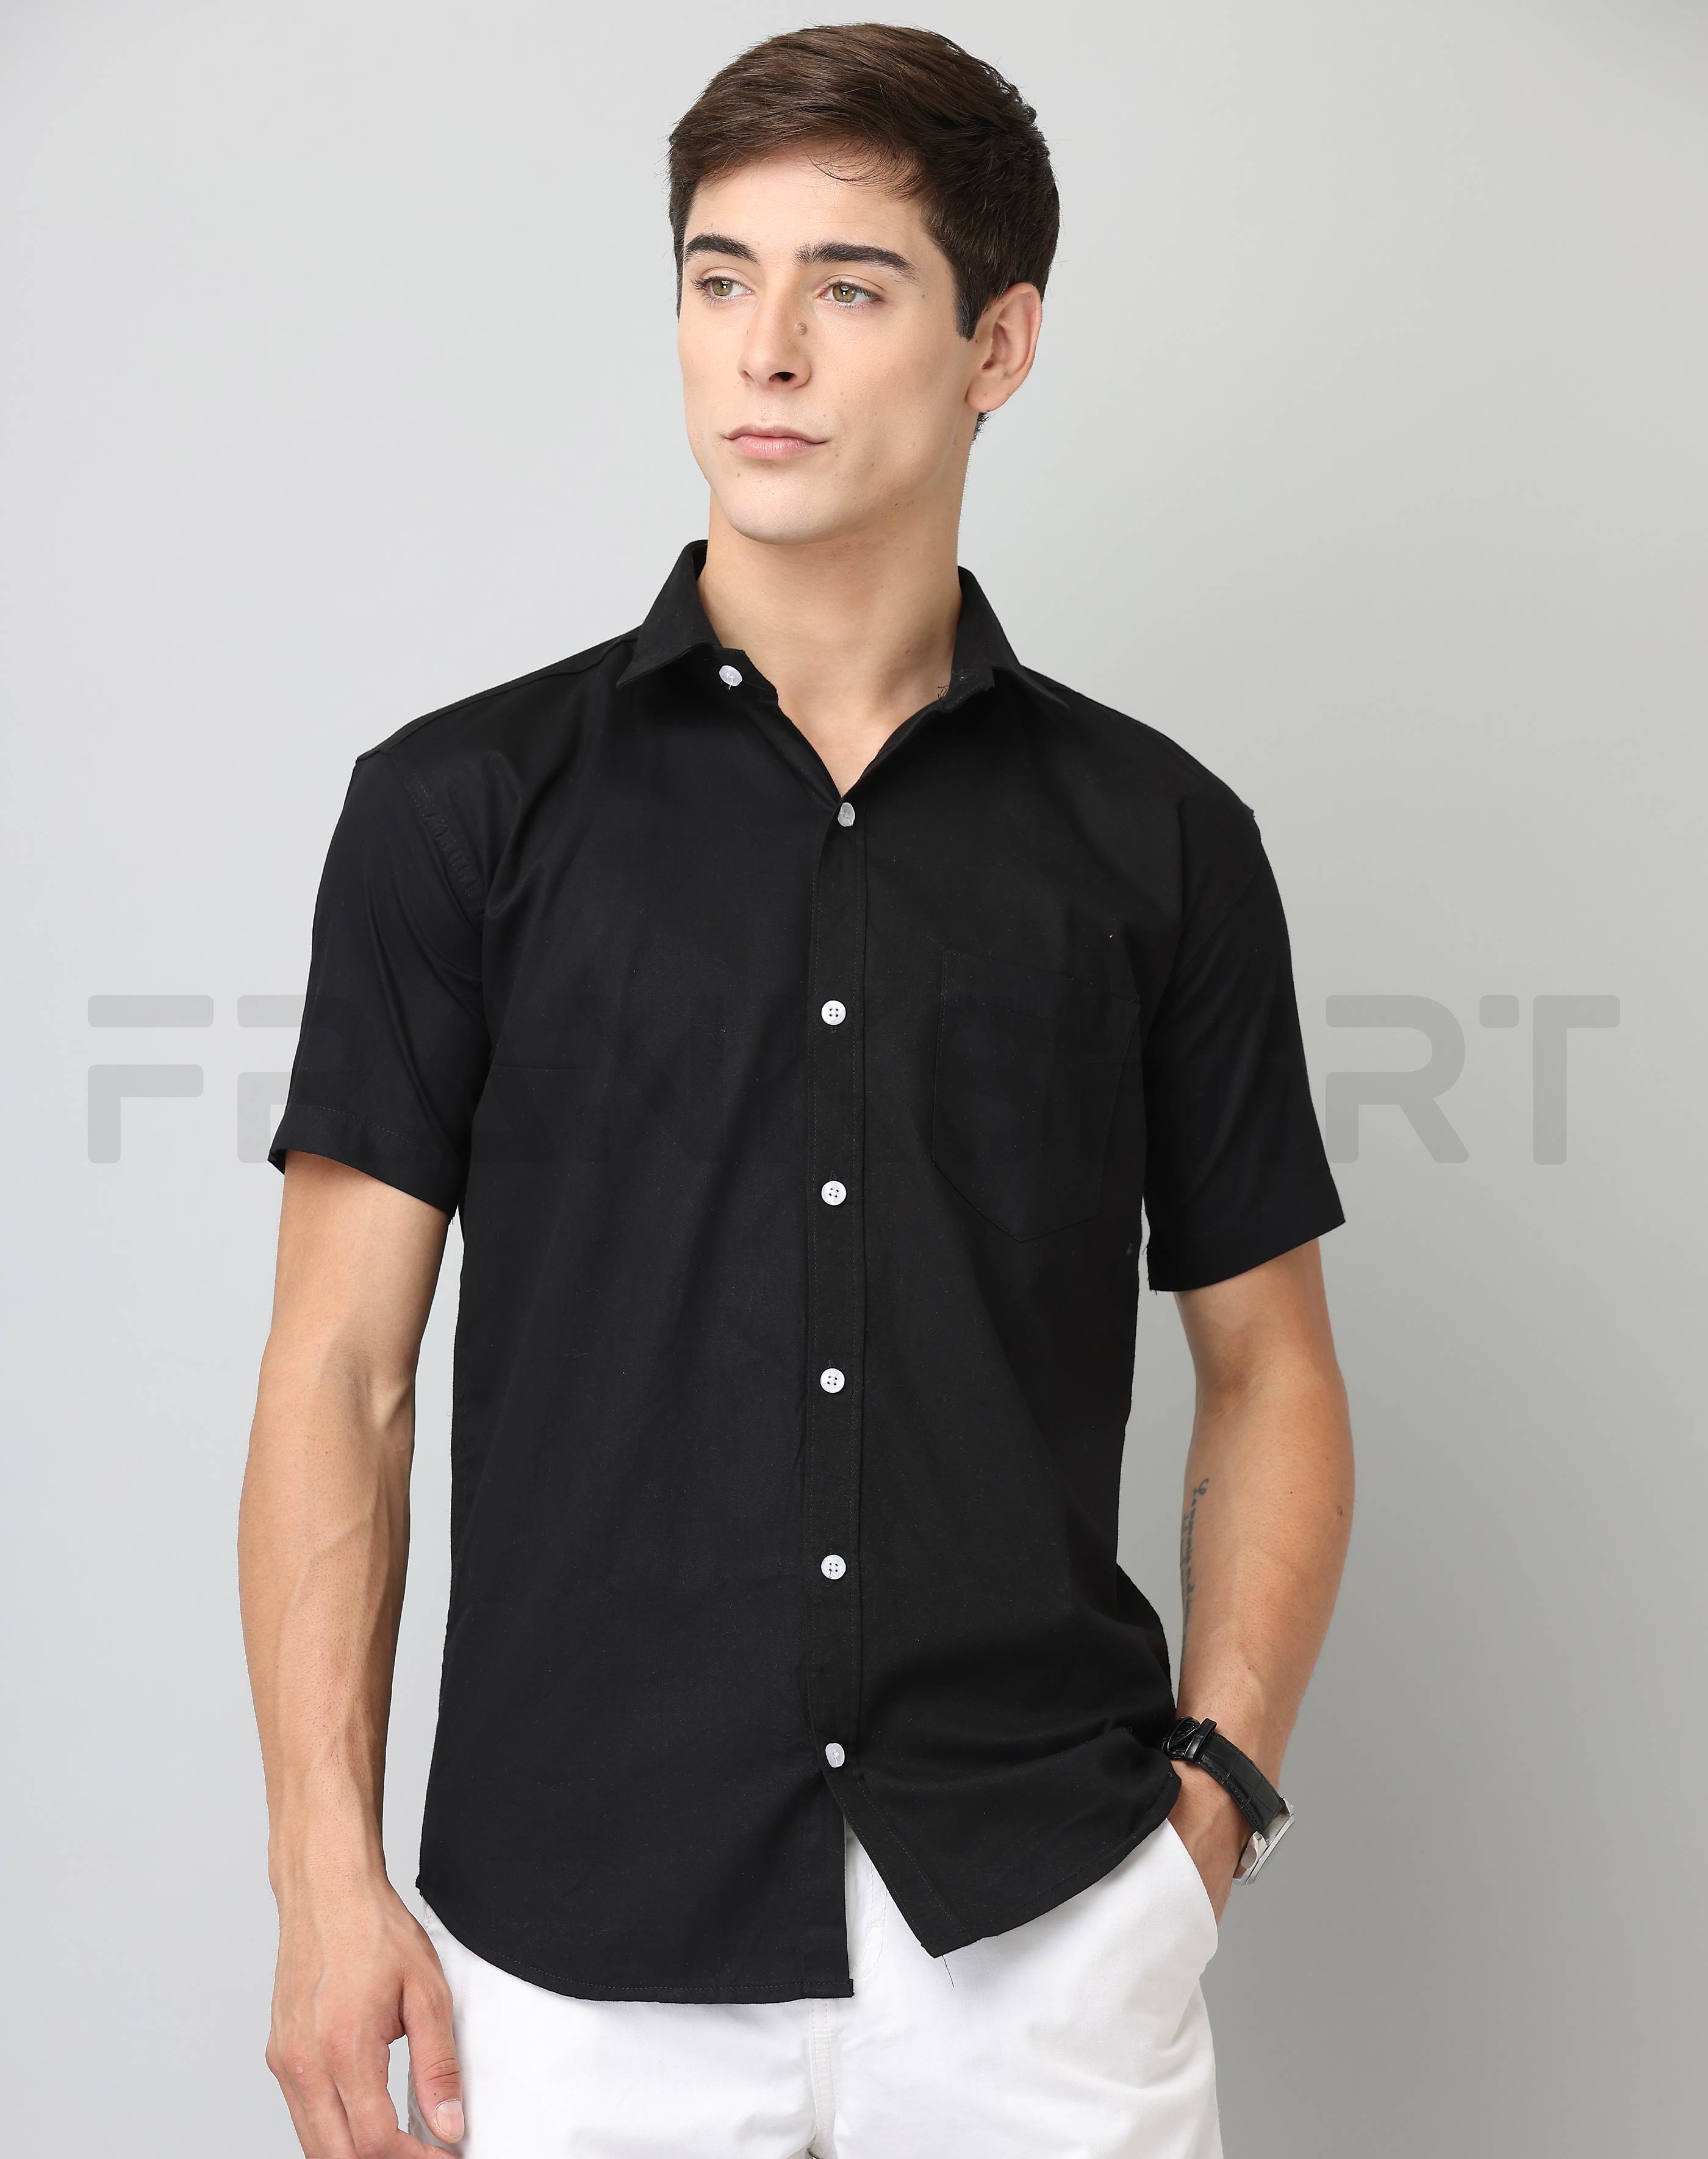 Frankshirt Half Sleeve Black Tailored Fit Cotton Casual Shirt for Man